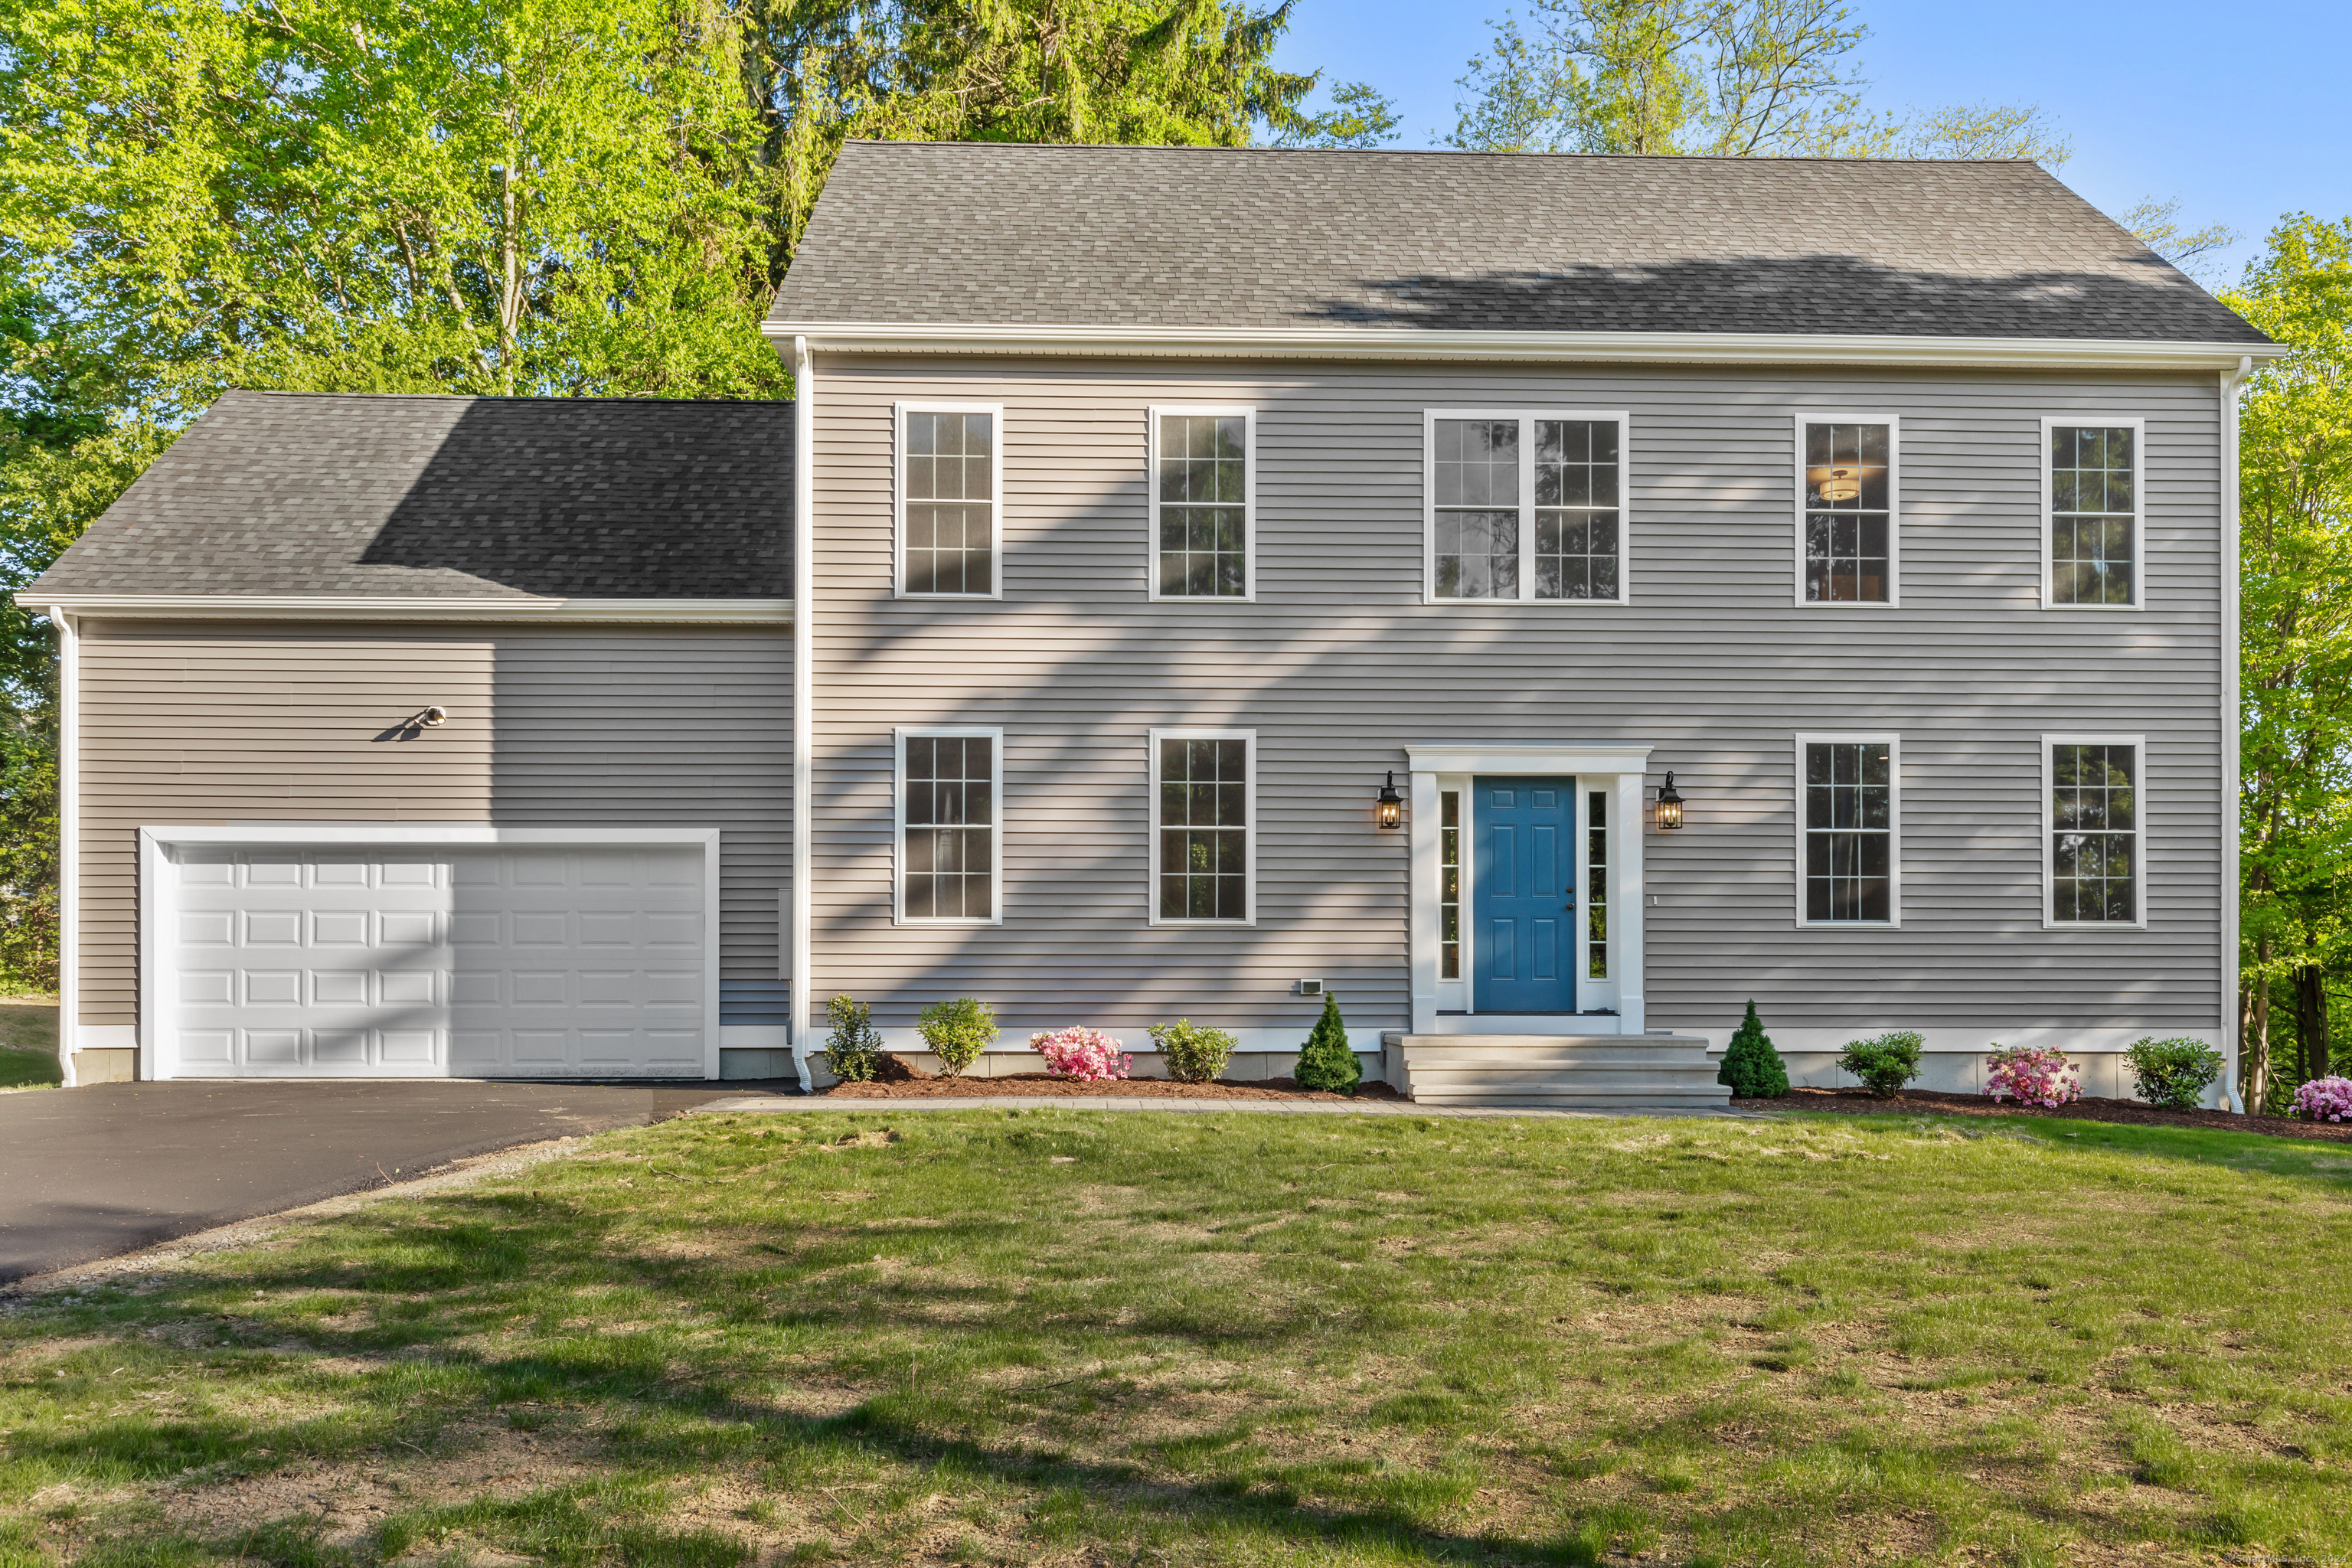 Move-in ready! This new construction Colonial is completed & ready for occupancy